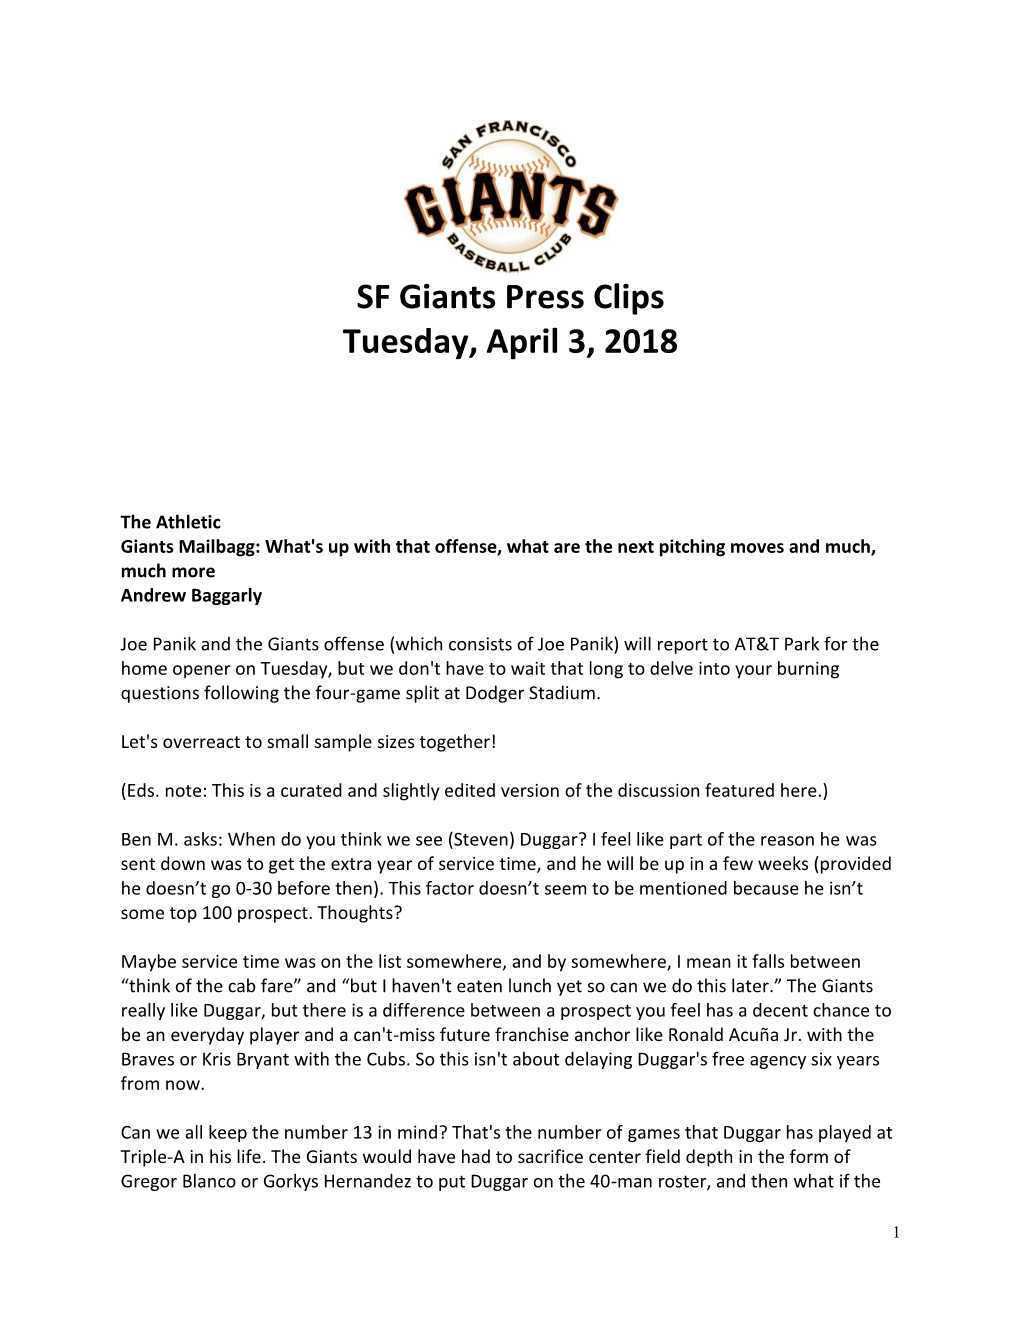 SF Giants Press Clips Tuesday, April 3, 2018